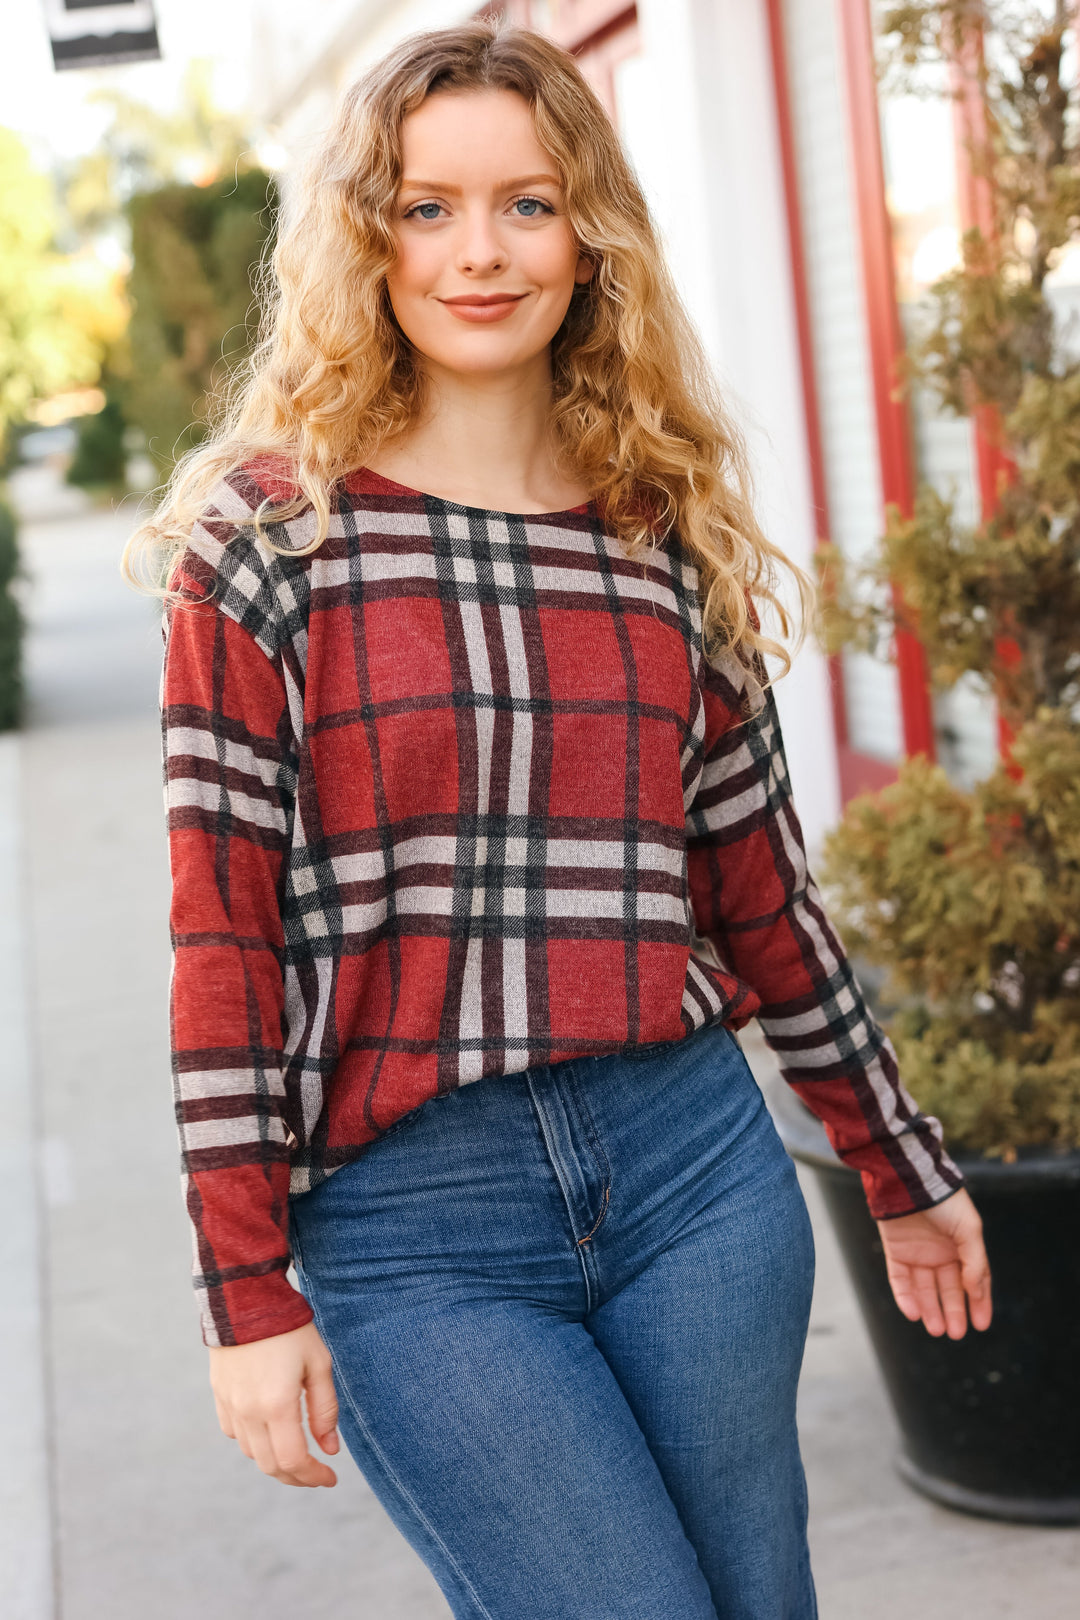 Good Times - Red Plaid Top